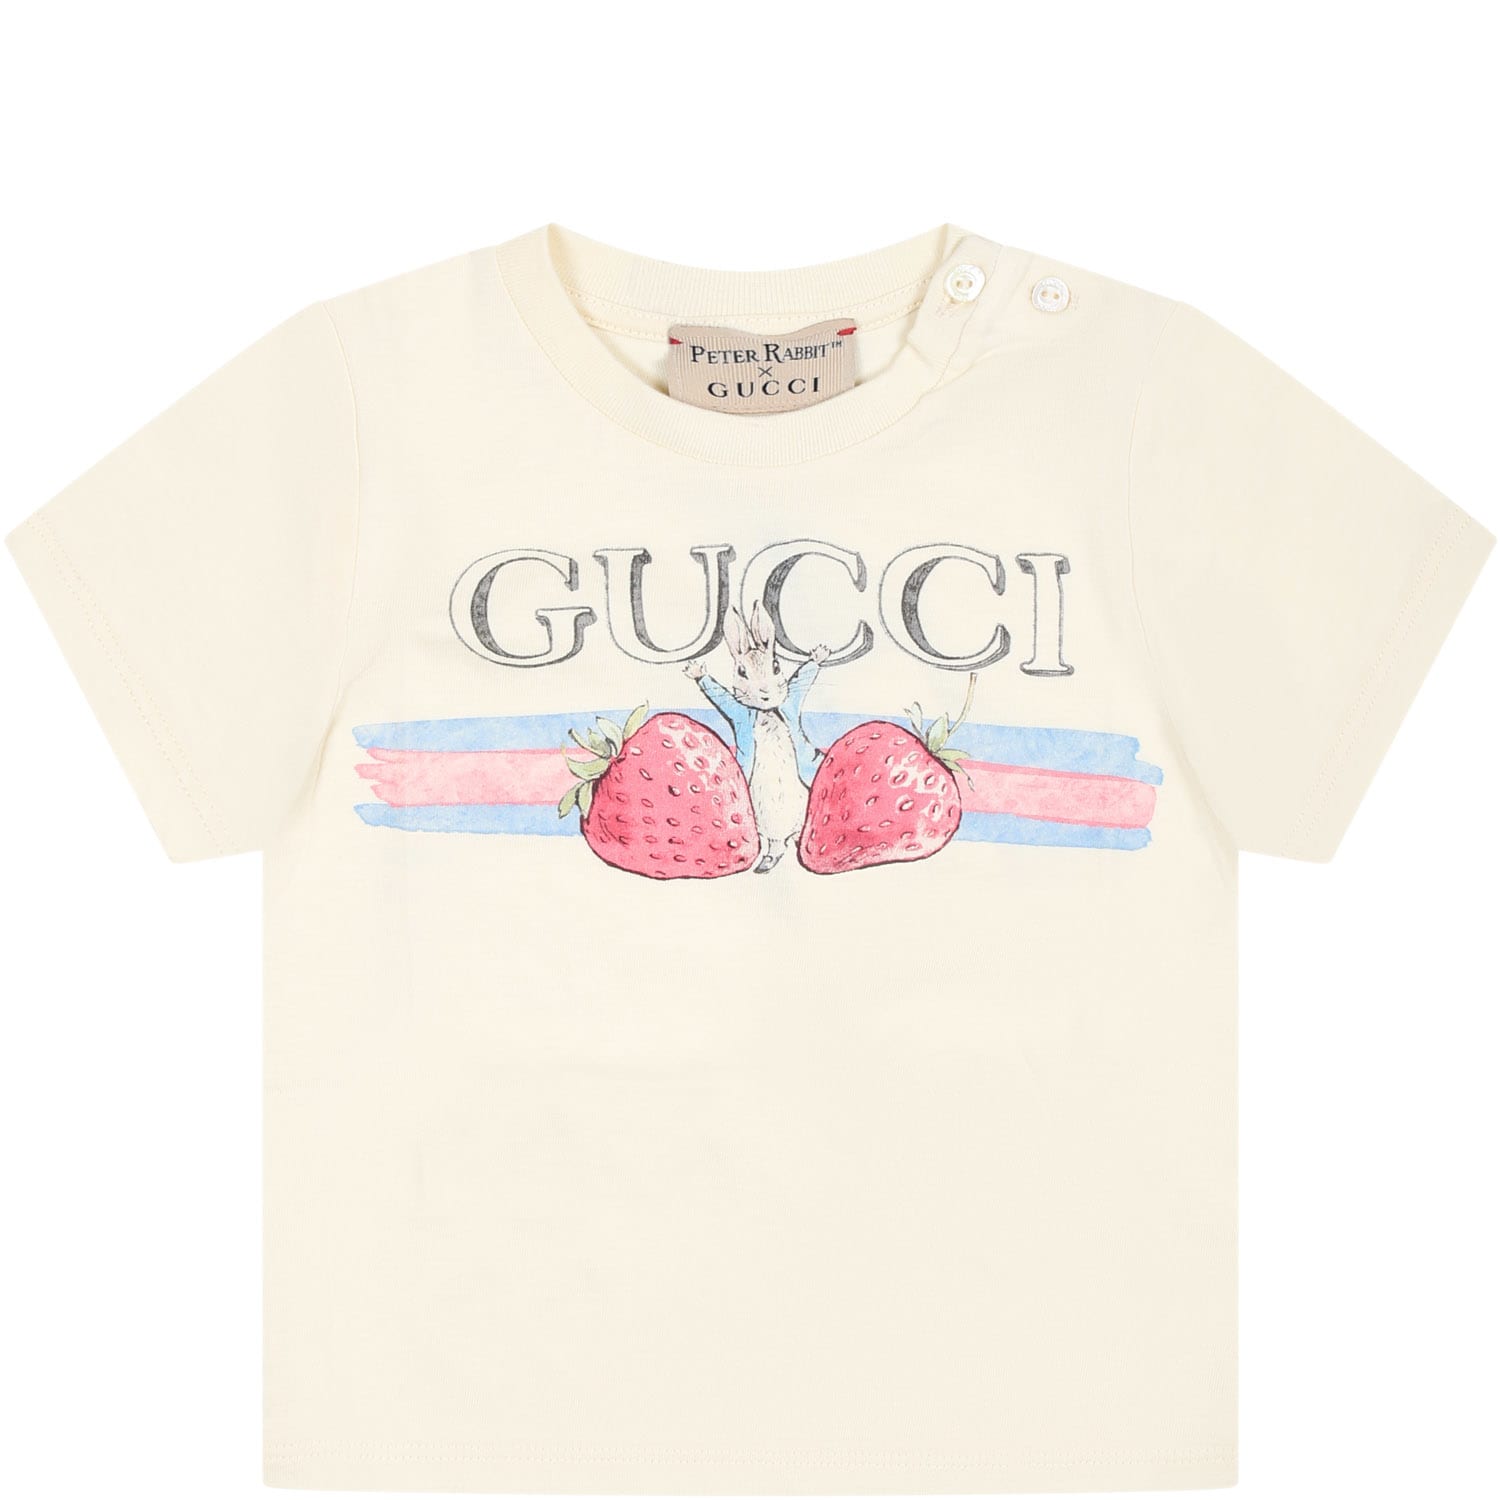 GUCCI IVORY T-SHIRT FOR BABY GIRL WITH PETER RABBIT